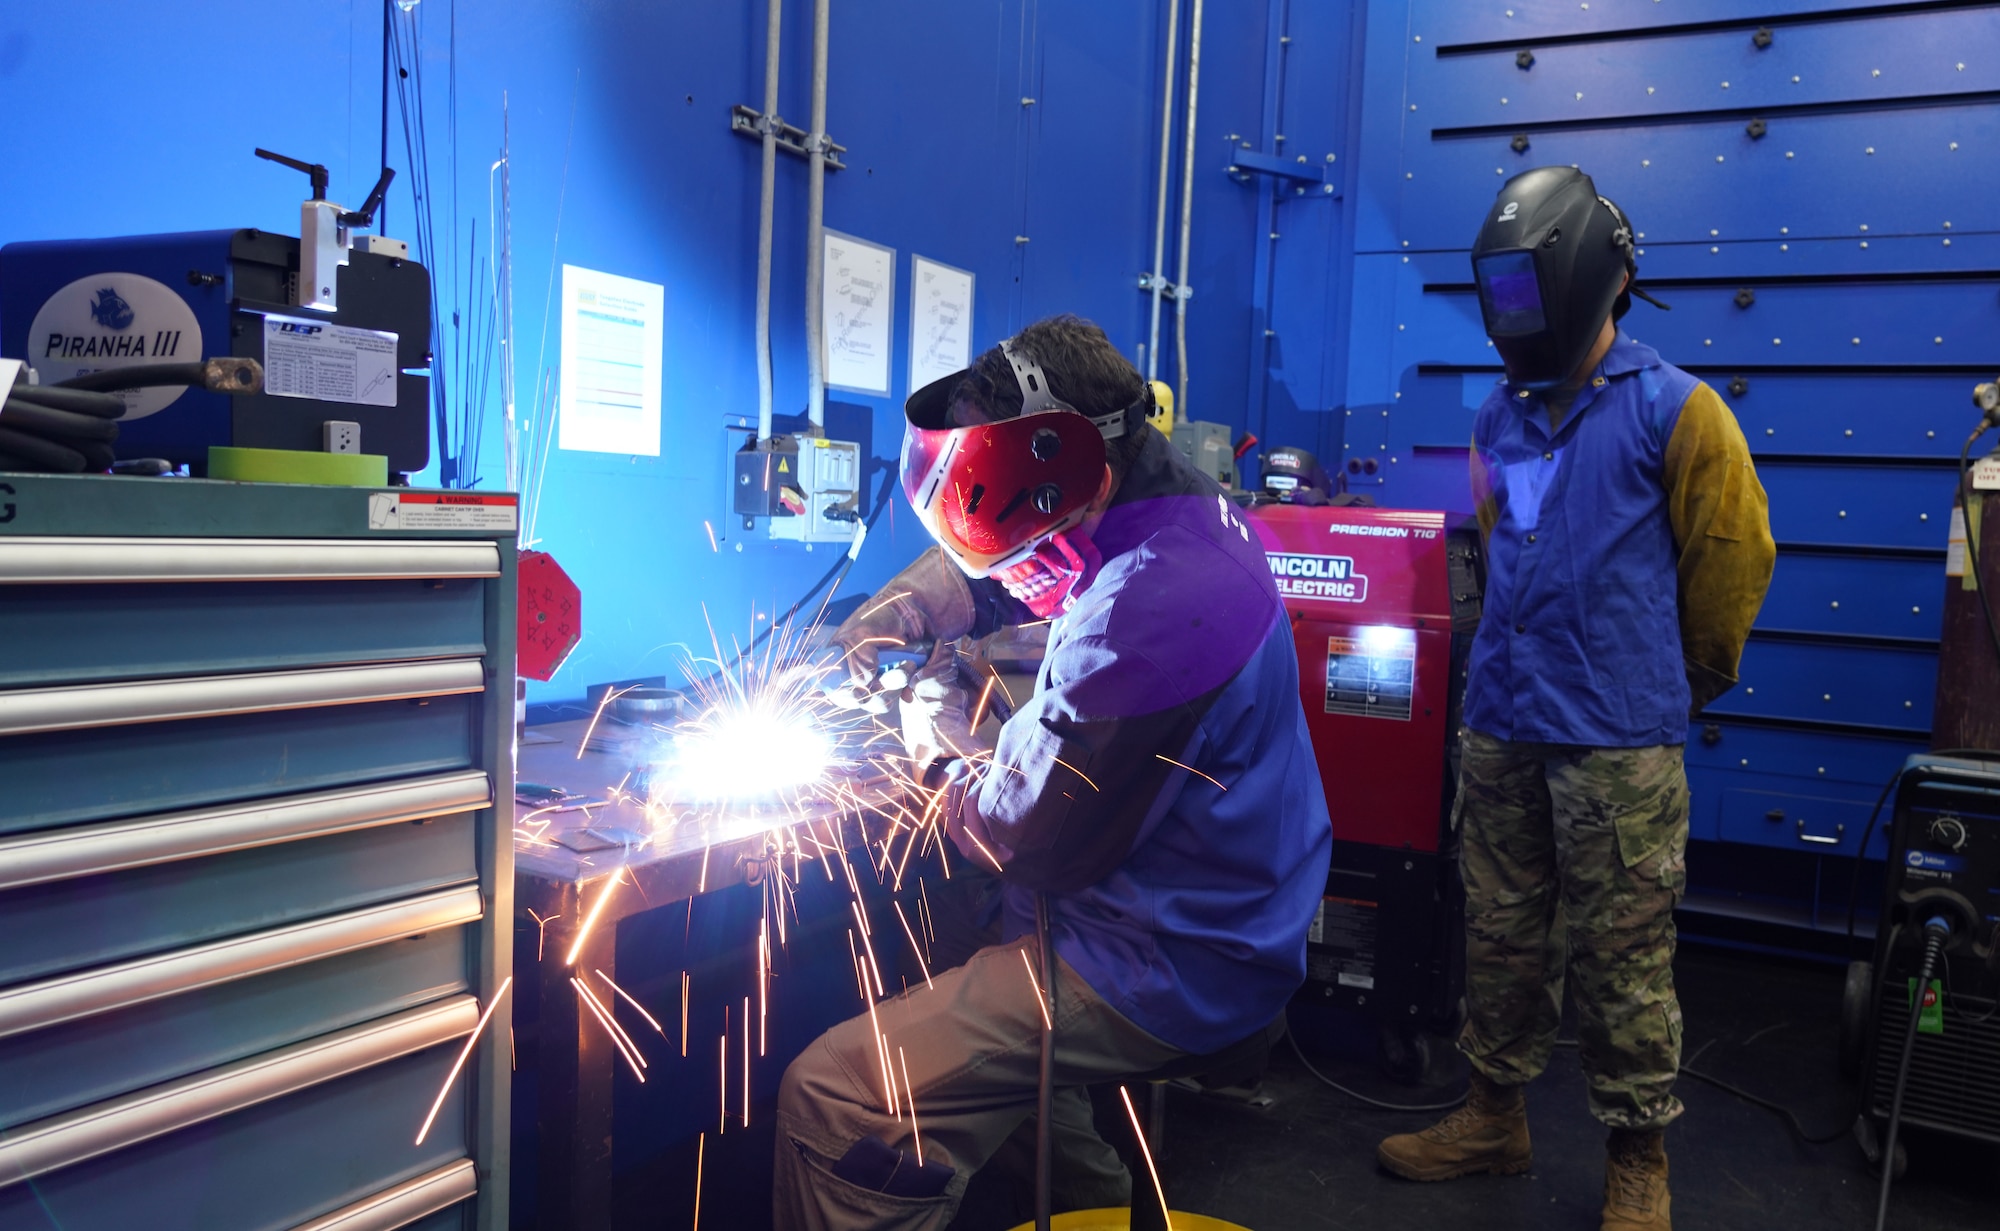 Col. Mattingly welds two pieces of practice metal together with supervision from Senior Airman Defillo.